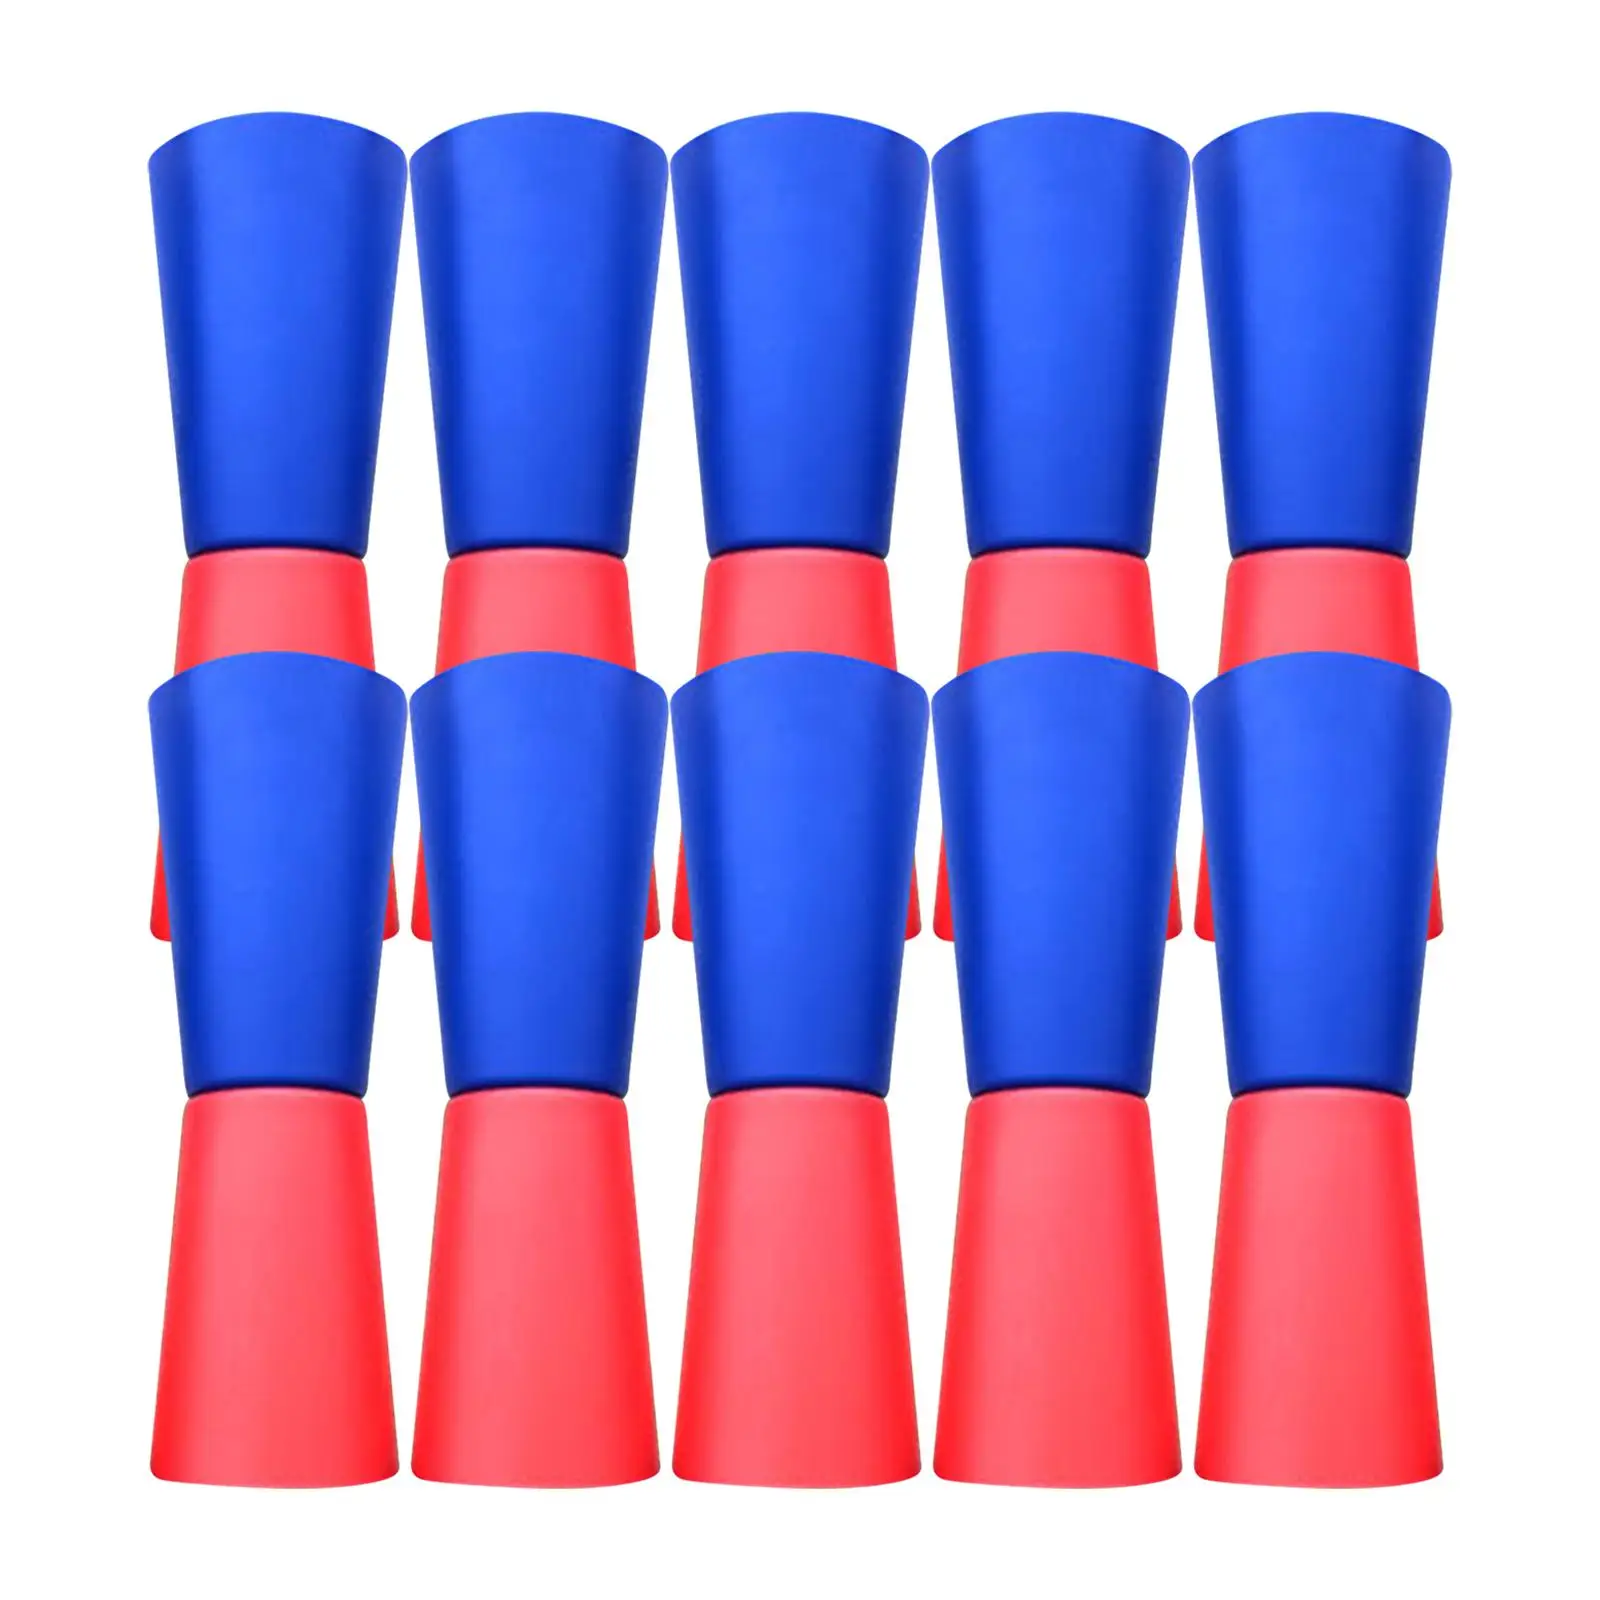 10 Pieces Flip Cups Agility Training Fitness Body Coordination Running Exercise for Indoor Football Events Kindergarten with Net